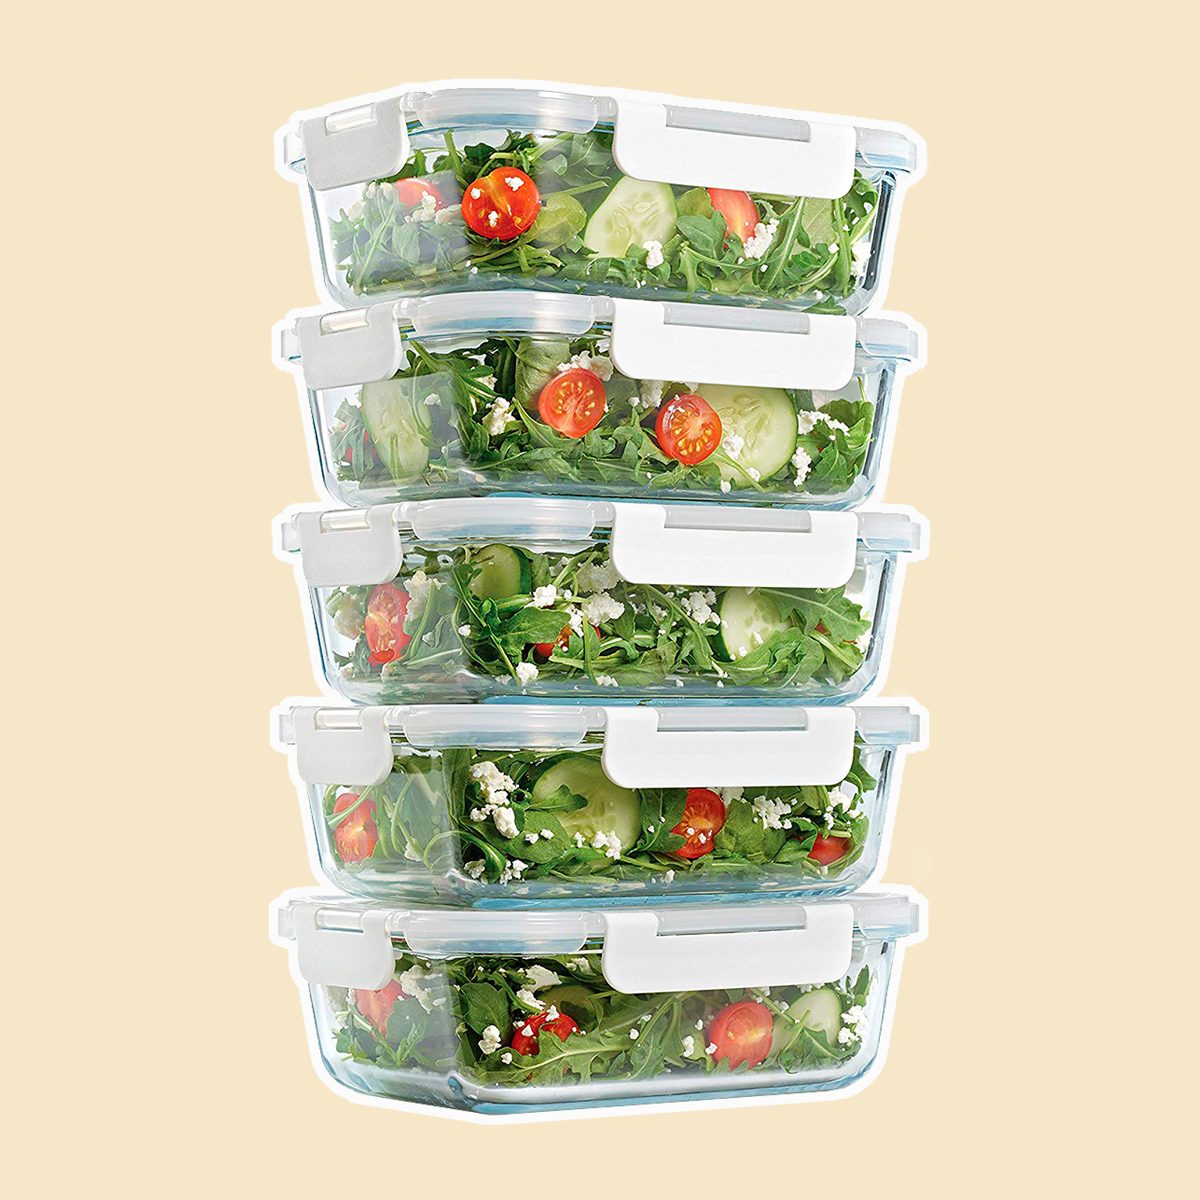 Fit & Fresh Salad Shaker Reusable Plastic Container & Dressing Dispenser &  Ice Pack, Lunch Box Set, 4-Cup 